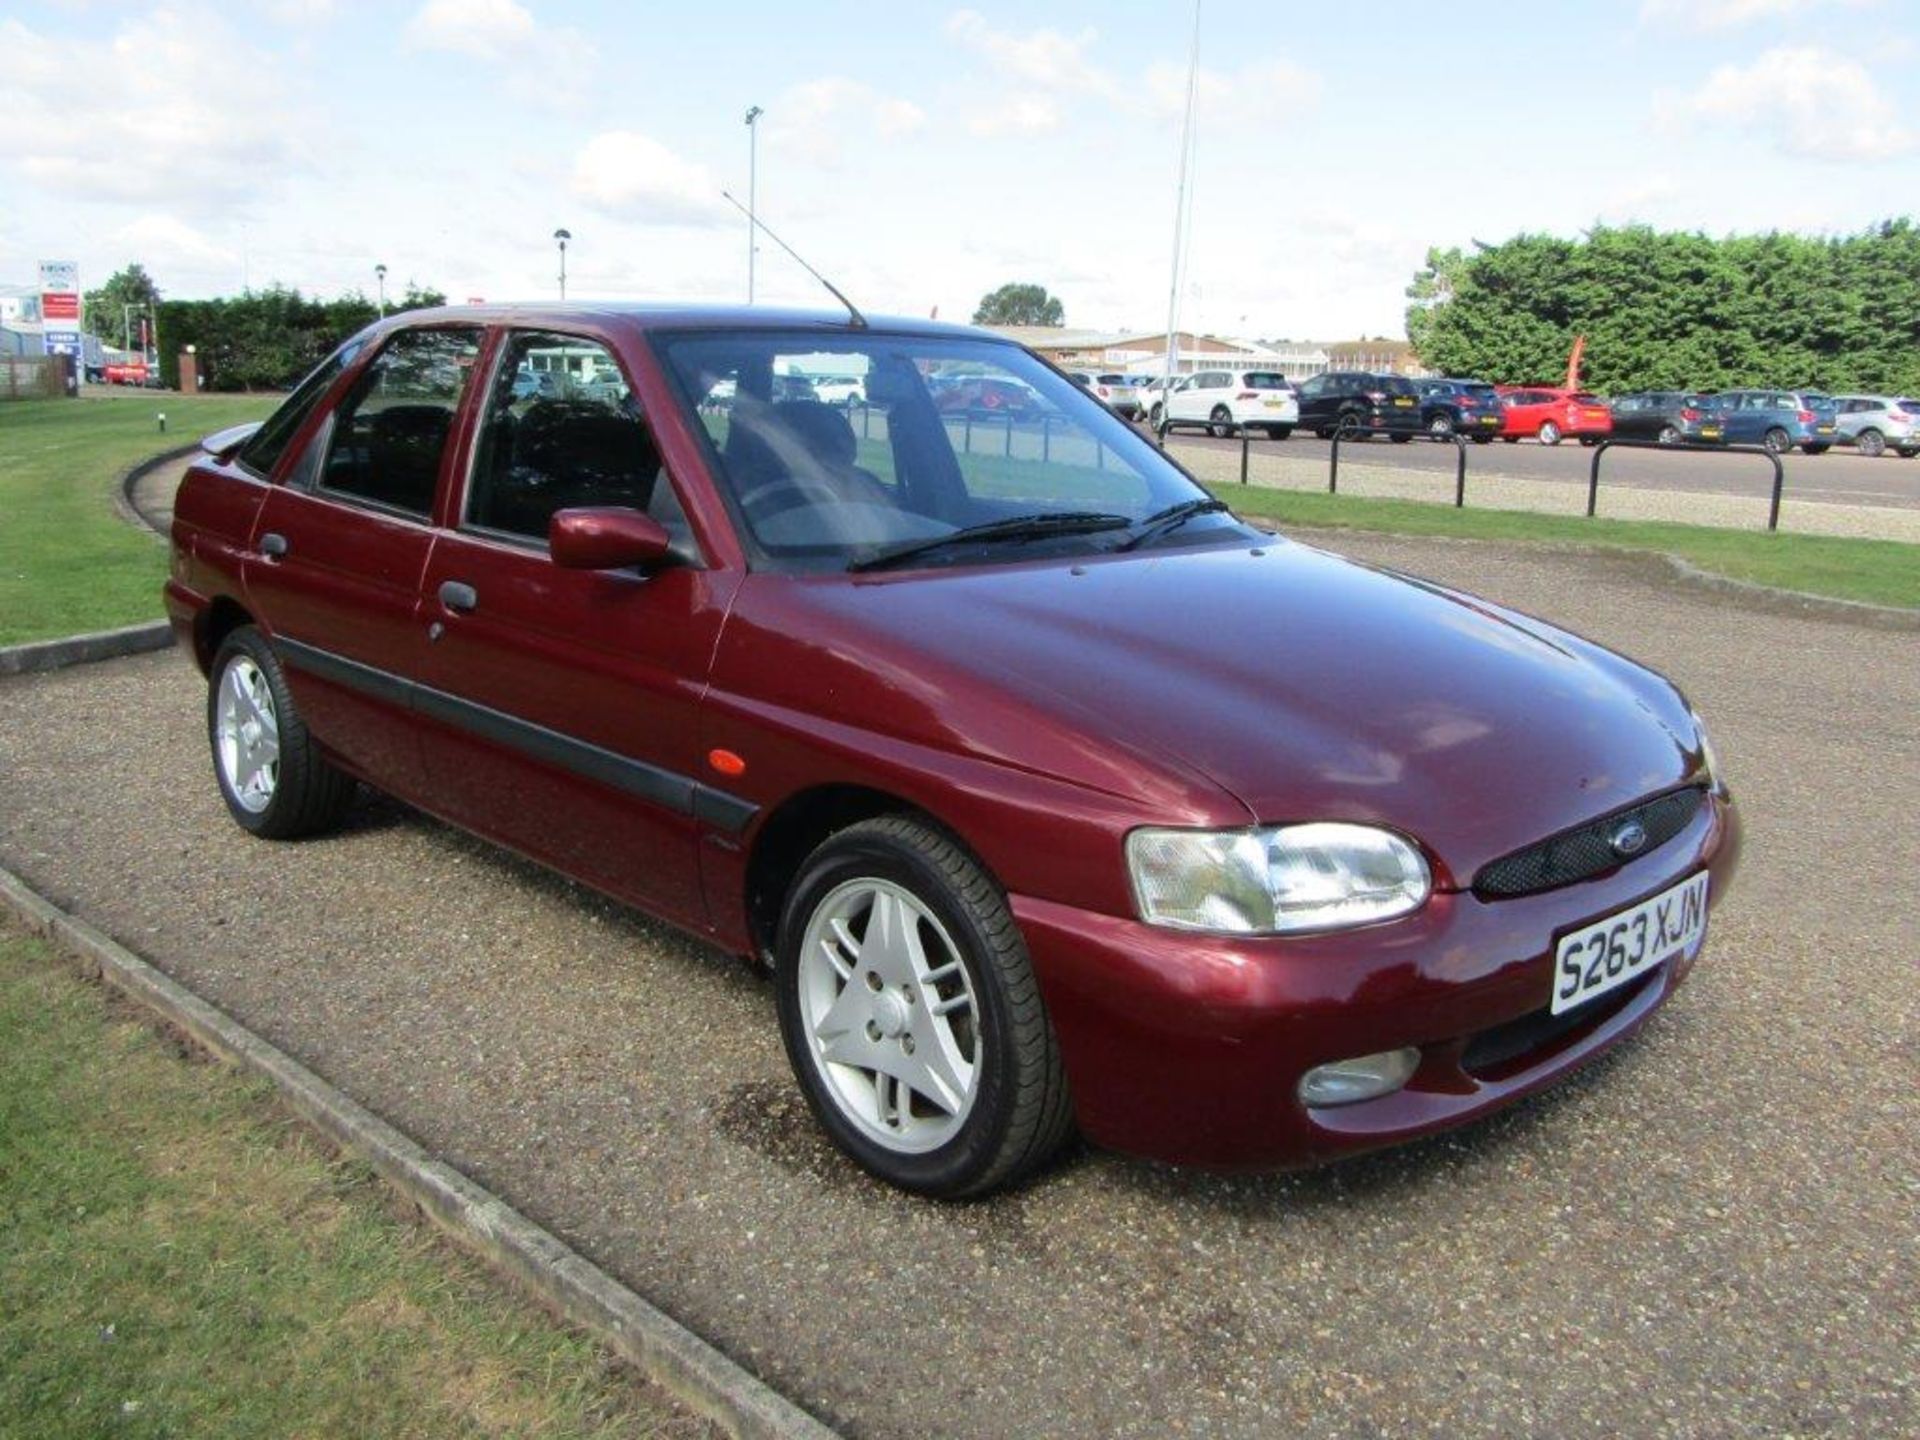 1999 Ford Escort 1.6 Finesse - Image 2 of 18